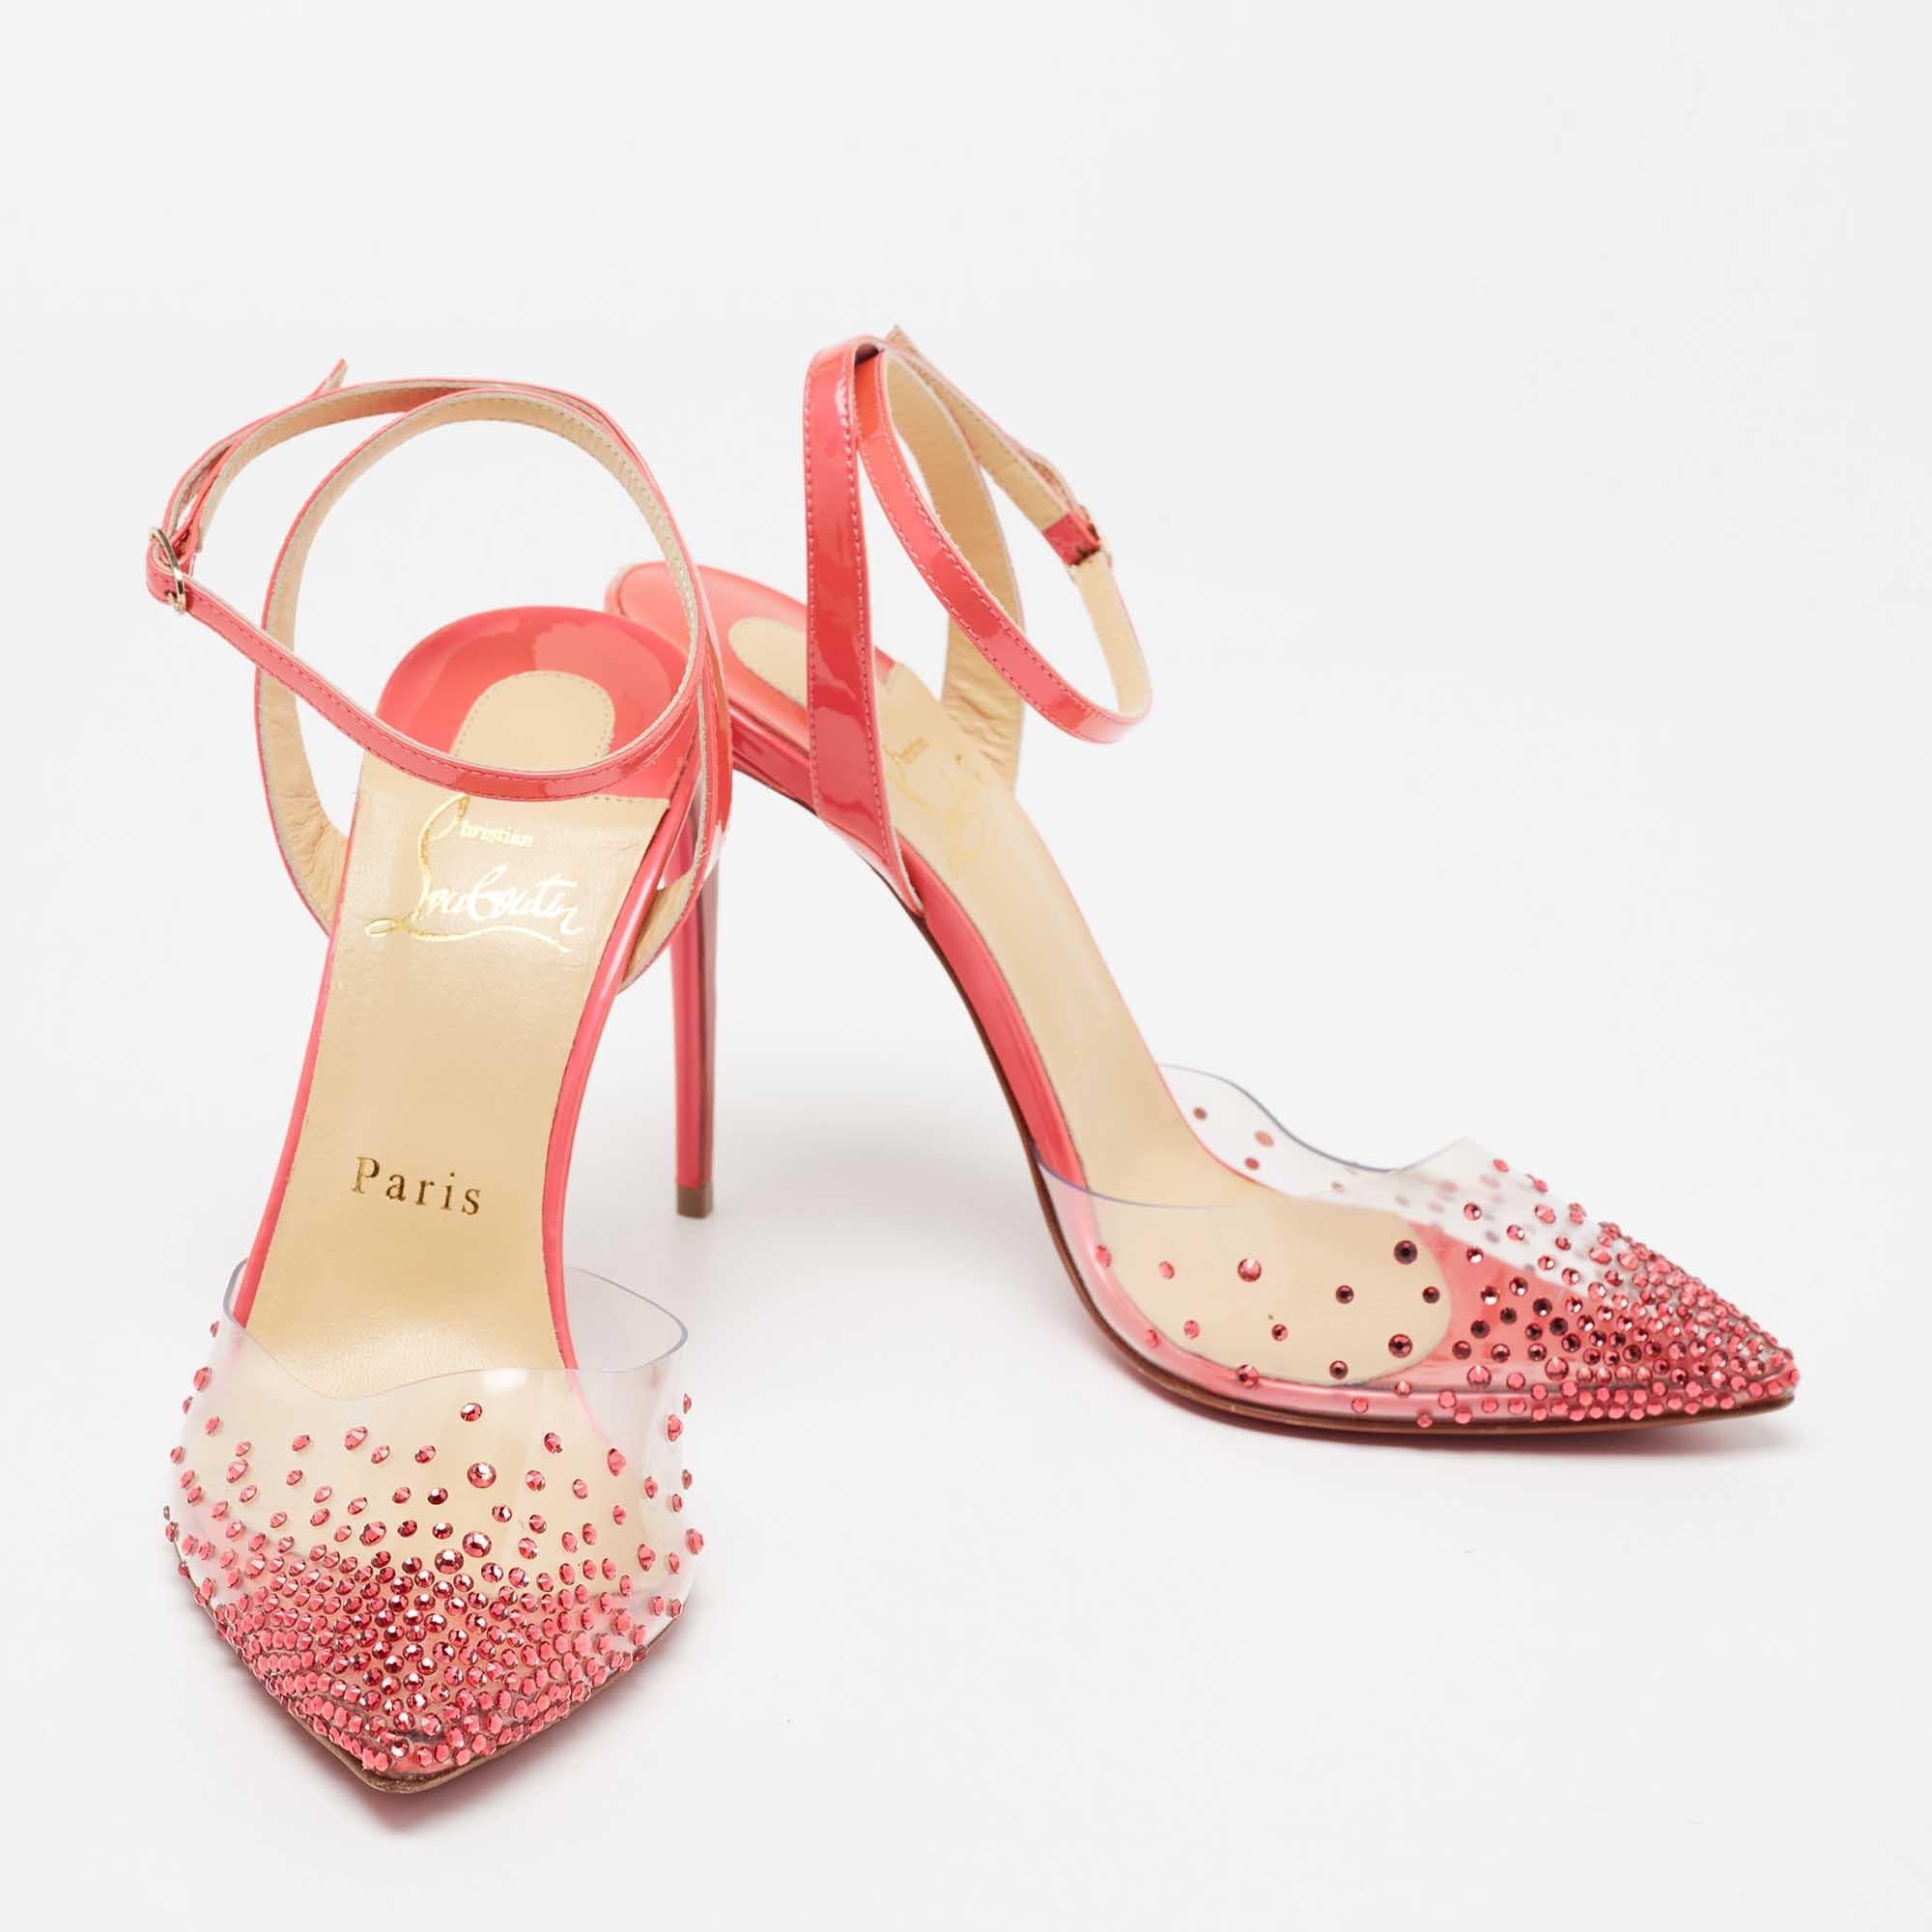 Rock these neon pink Christian Louboutin spike pumps at the next summer party! They have been crafted from patent leather and PVC into an ankle strap design and come with comfortable insoles. Pair the chic 10.5 cm heels with dresses and rompers for